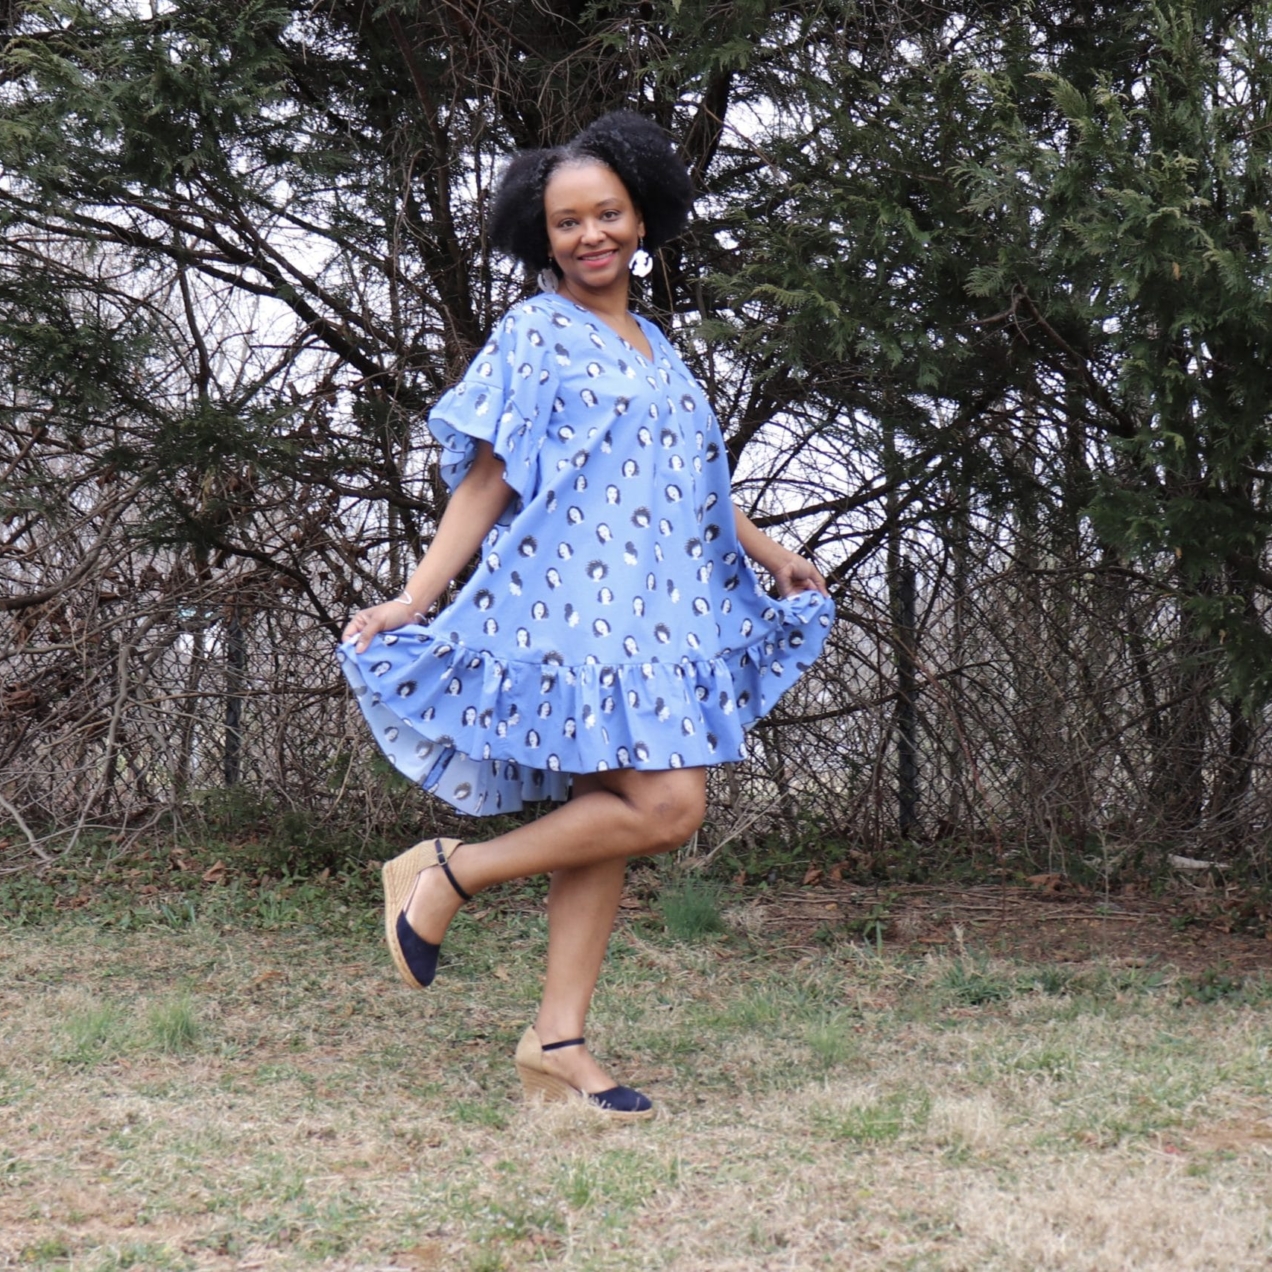 Allison Tent Dress: A Fun and Floaty Dress for Spring